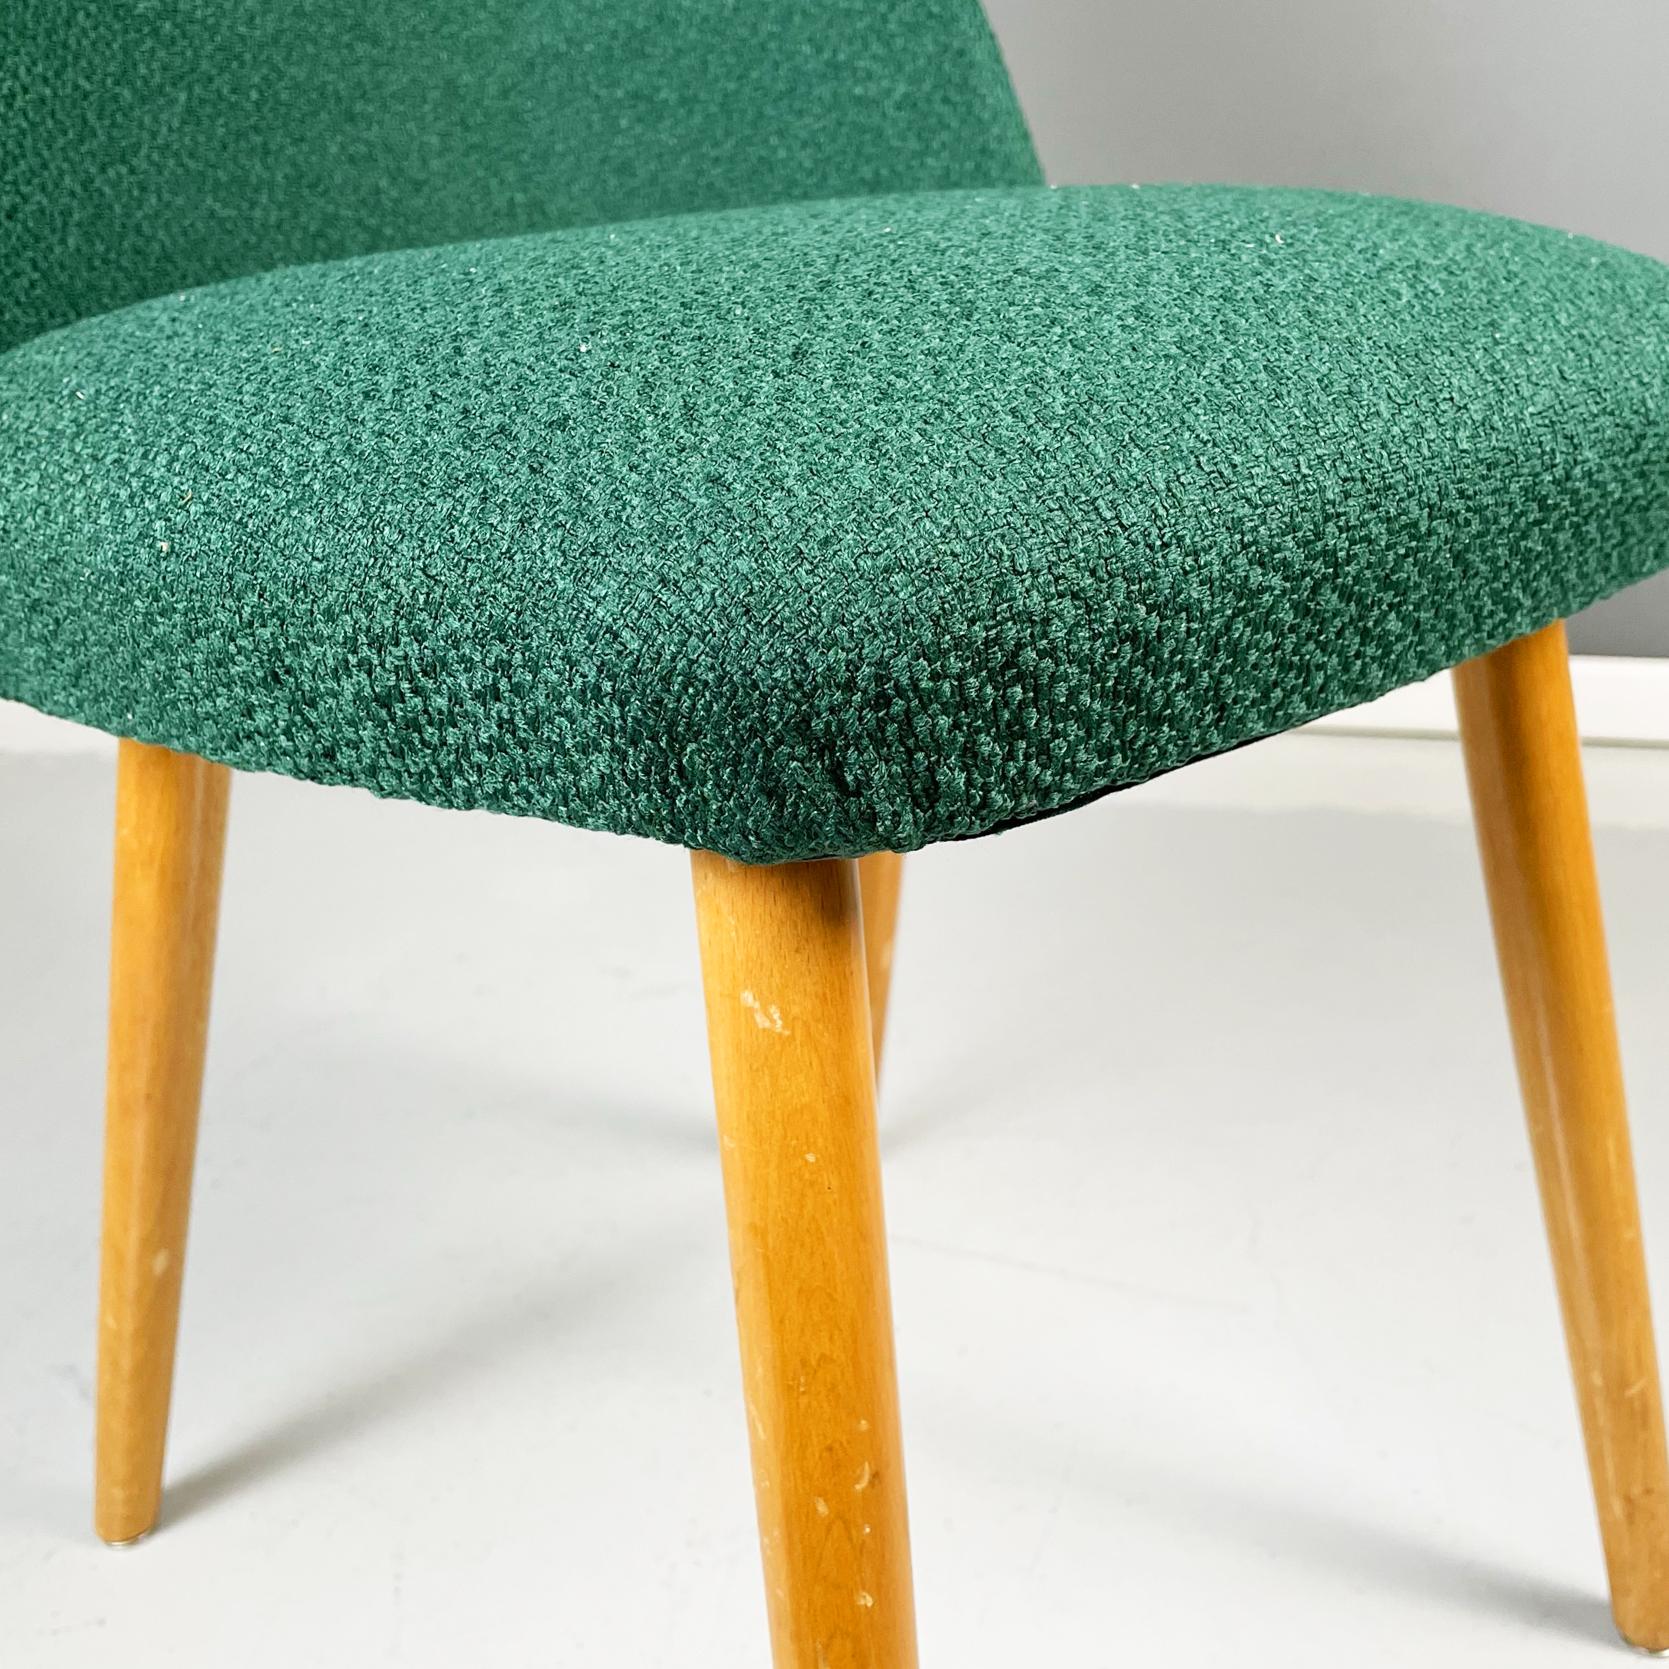 Italian Mid-Century Modern Chairs in Forest Green Fabric and Wood, 1960s For Sale 5